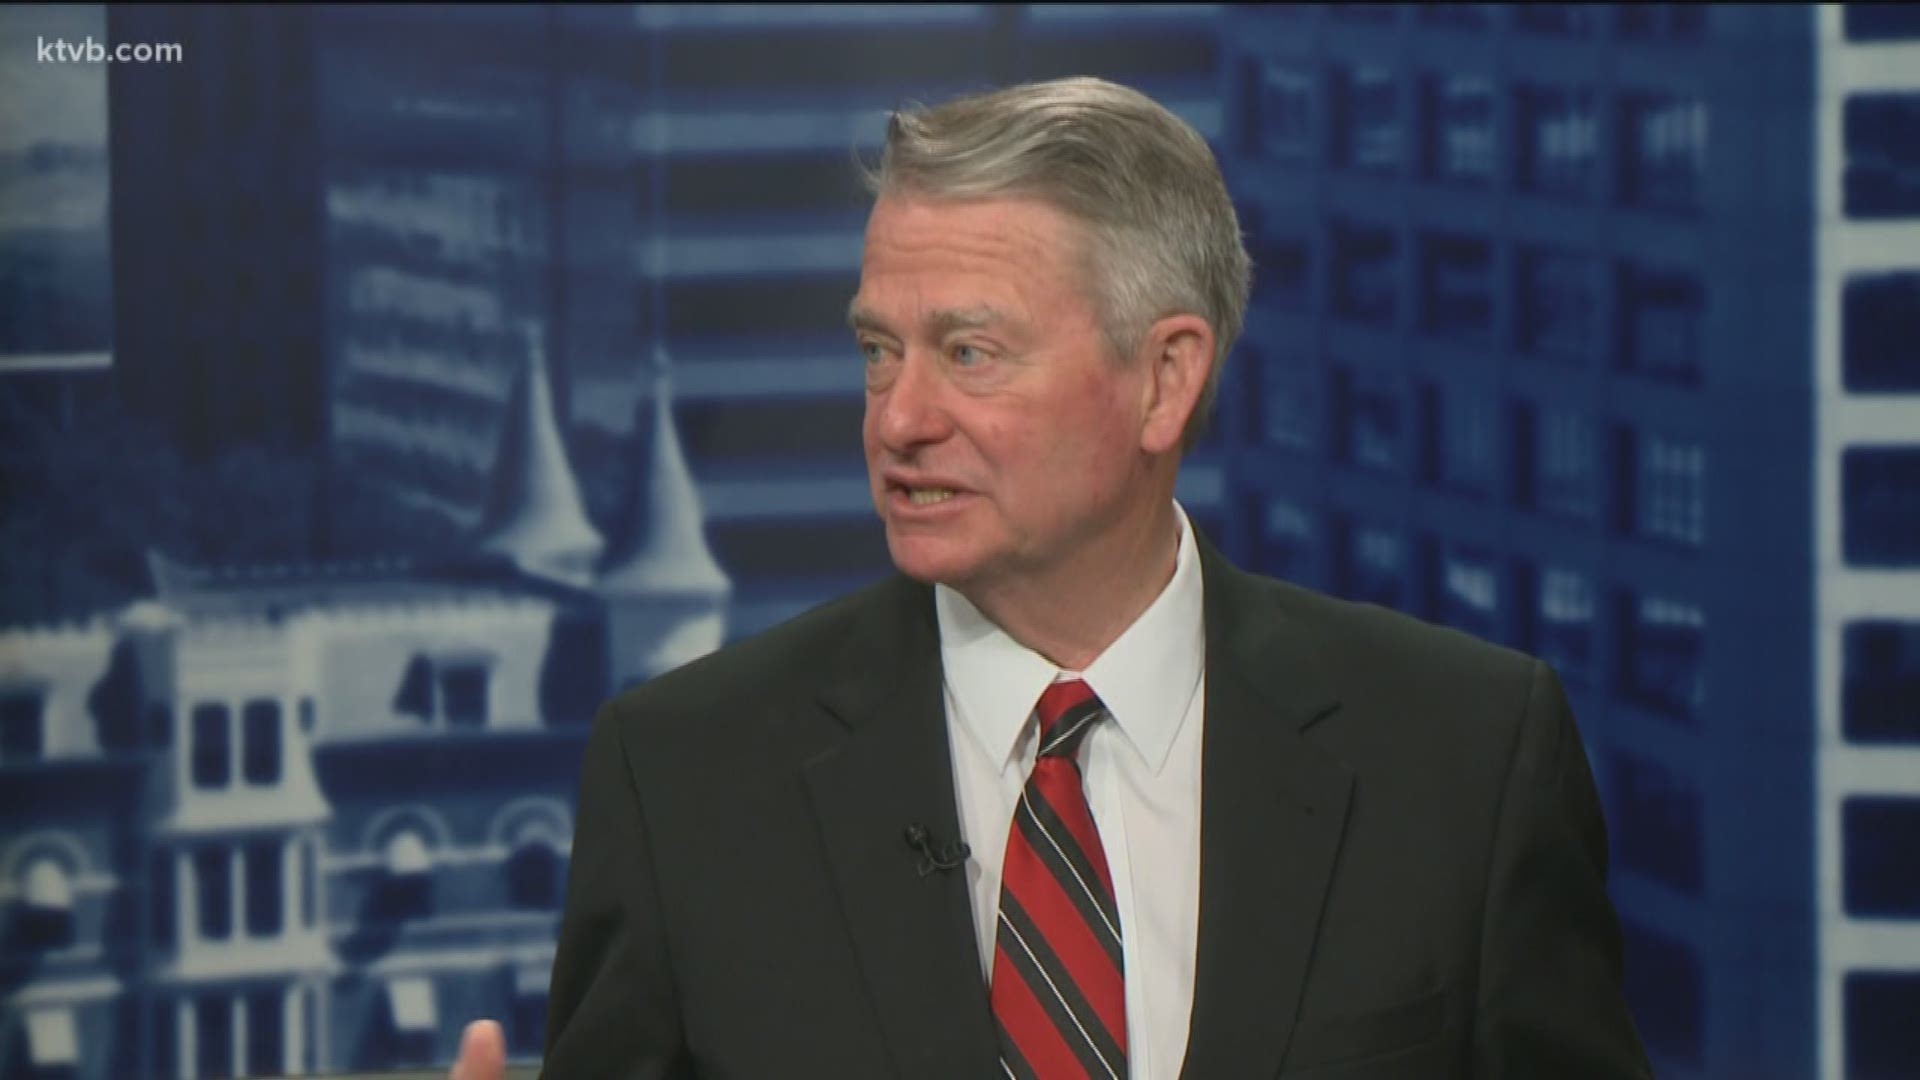 Although the session is over, Gov. Little says the Legislature has more work to do when they return in 2020.